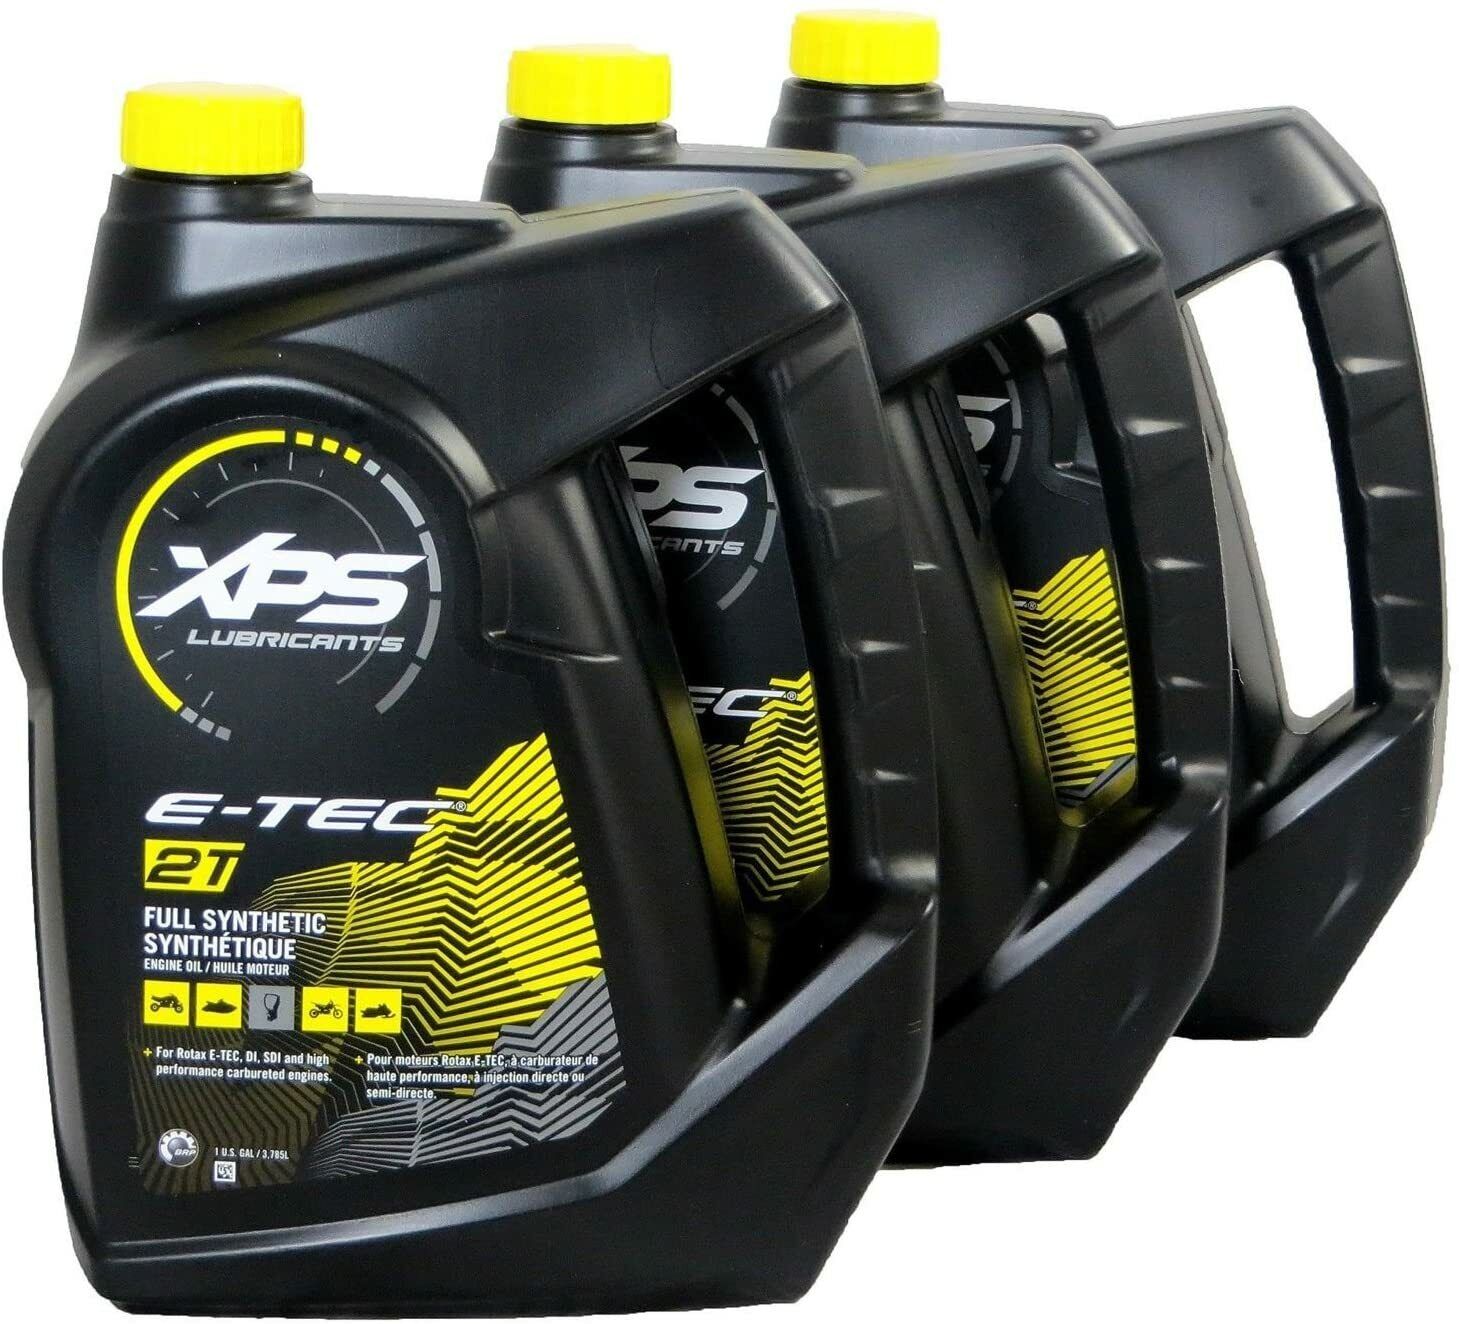 Ski-Doo Can-Am Sea-Doo XPS OEM 2-Stroke Full Synthetic Oil Gallon, 779127 3 Pack